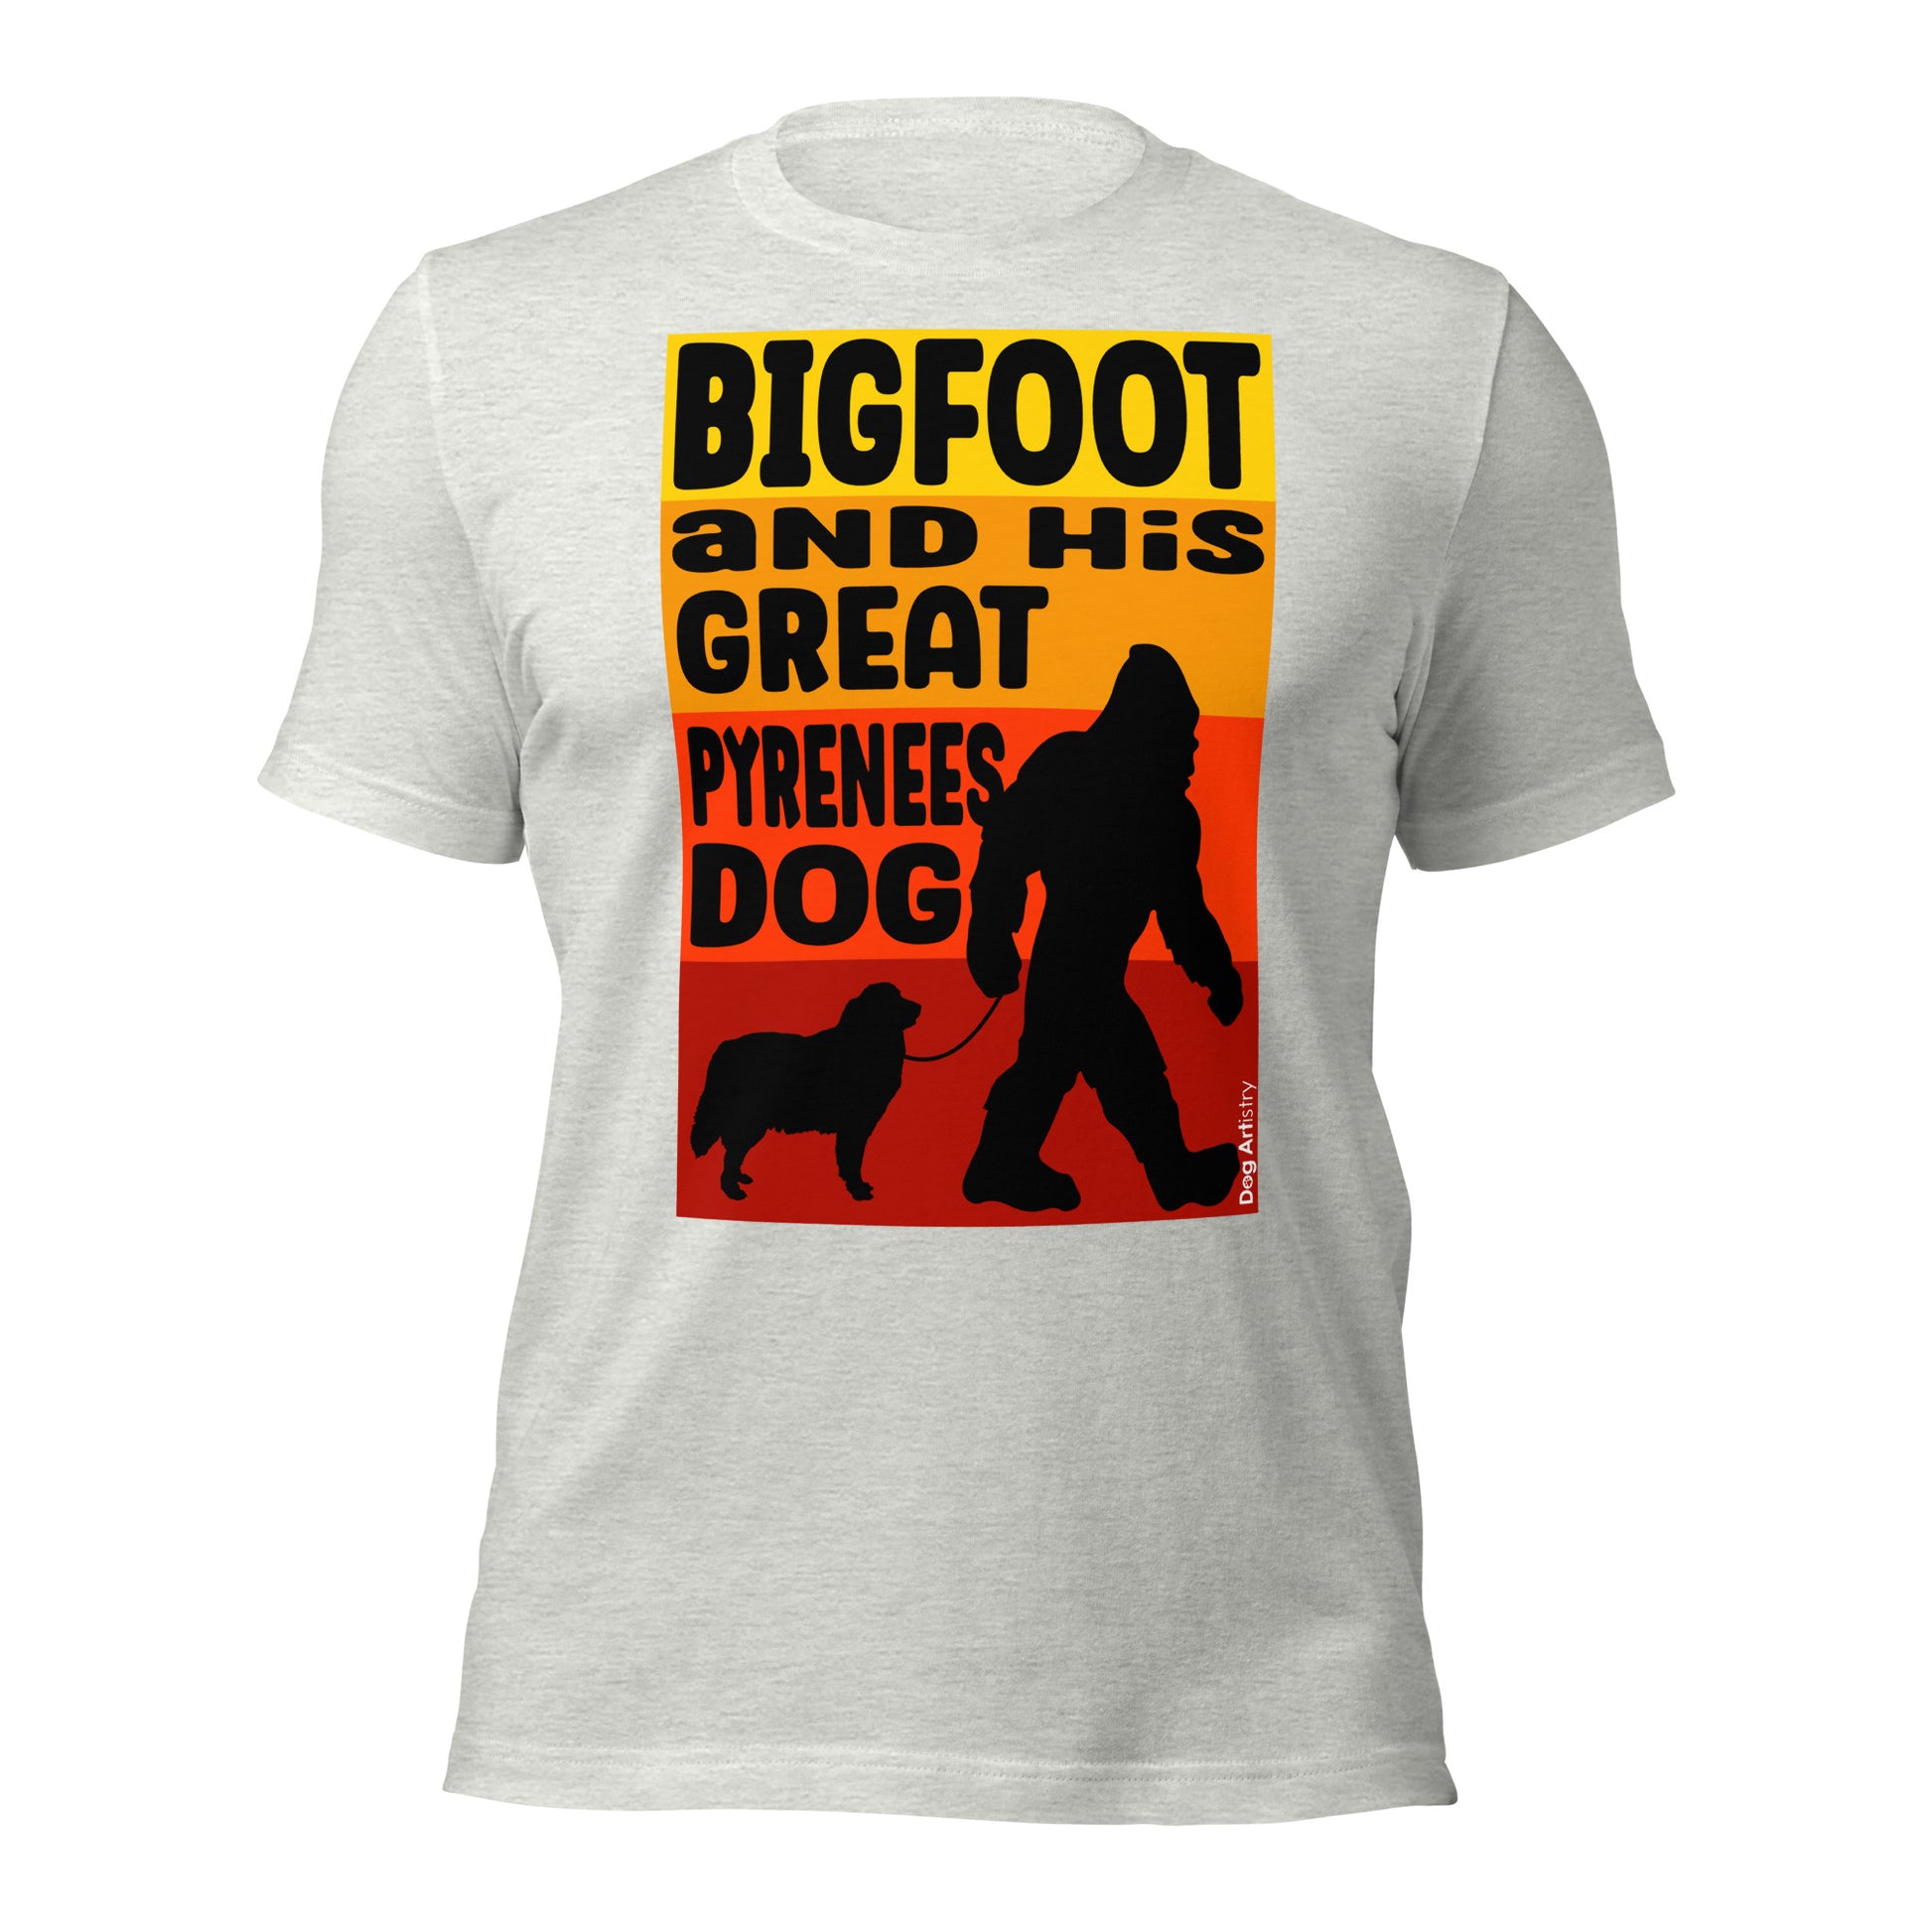 Bigfoot and his Great Pyrenees unisex ash t-shirt by Dog Artistry.